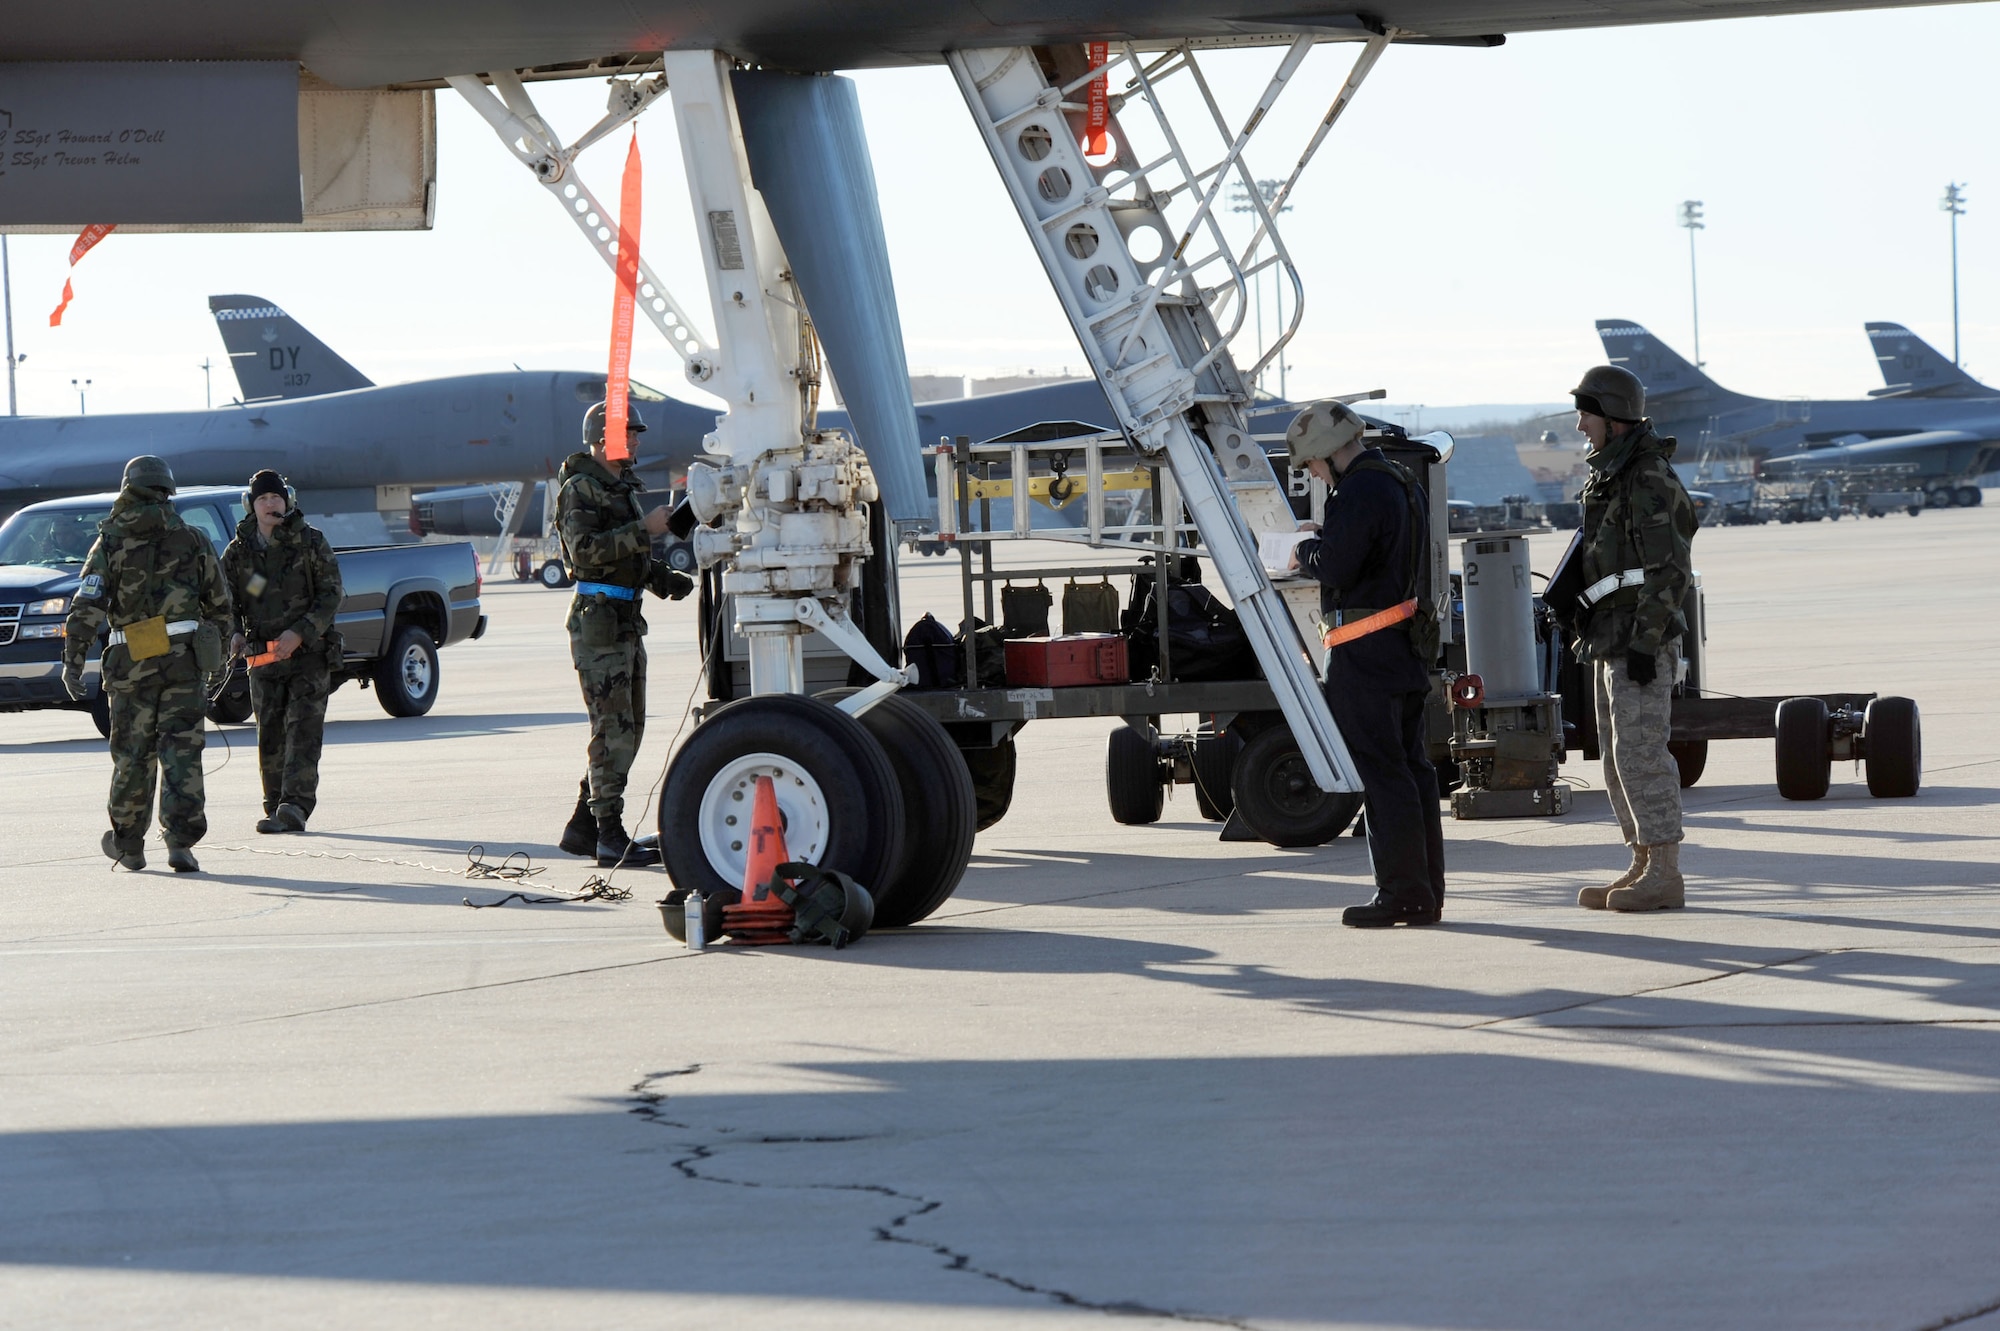 DYESS AIR FORCE BASE, Texas -- Members of the 7th Bomb Wing maintain and load weapons on the B-1B Lancer during the operational readiness inspection here, Jan. 6.  Properly maintaining and loading bombs on the B-1B is crucial to Dyess' mission success.  (U.S. Air Force photo by Staff Sgt. Darcie Ibidapo)